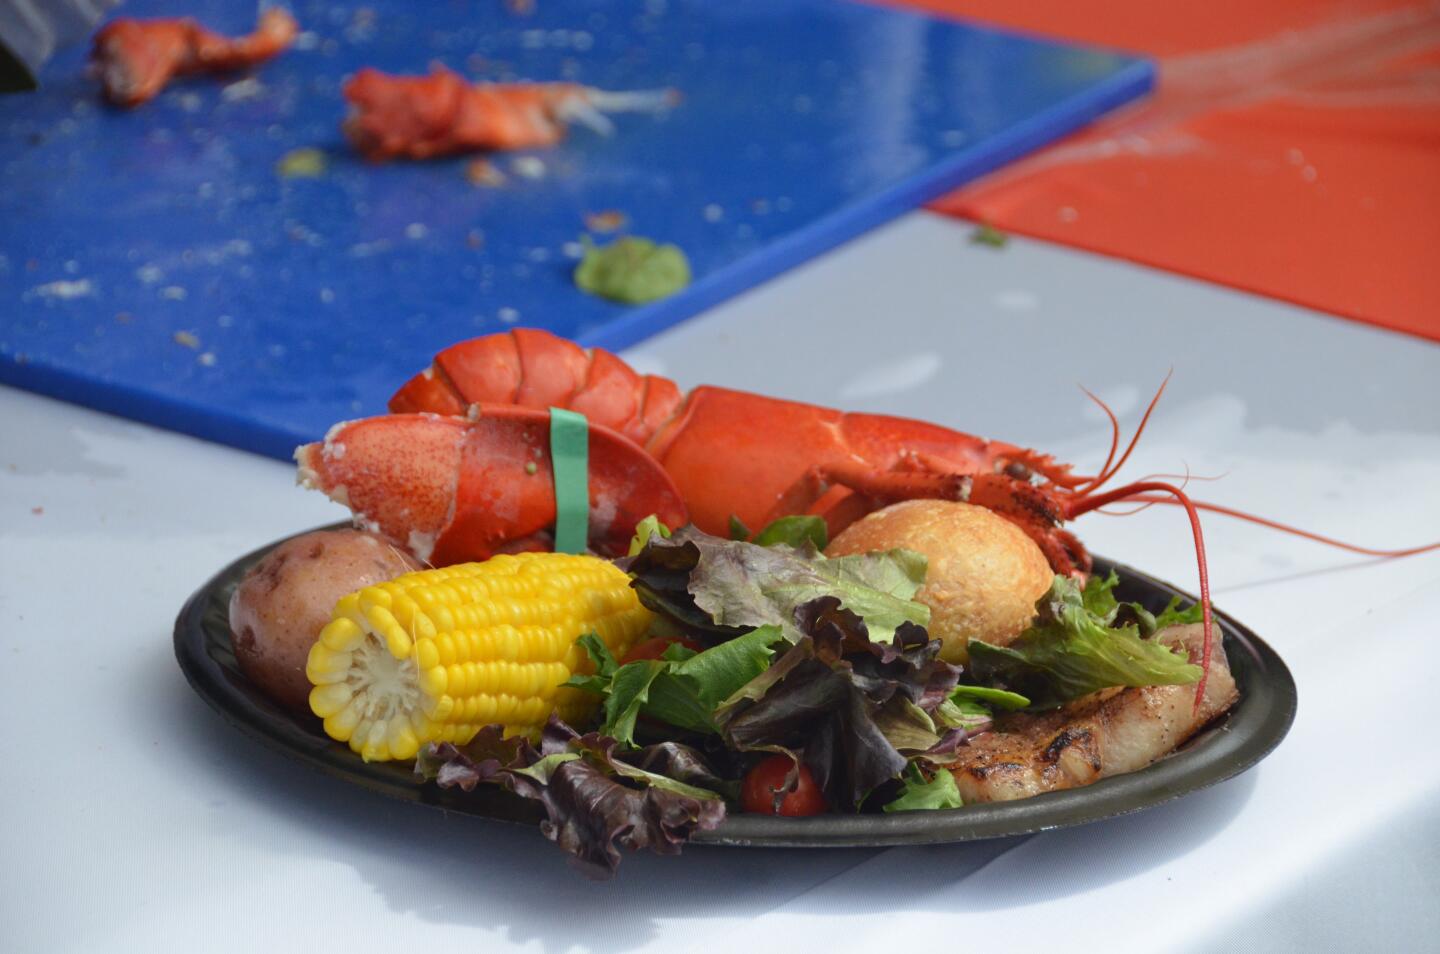 Lobster, steak and sides enticed a hungry crowd Sunday to Newport Beach's 11th annual Lobsterfest.